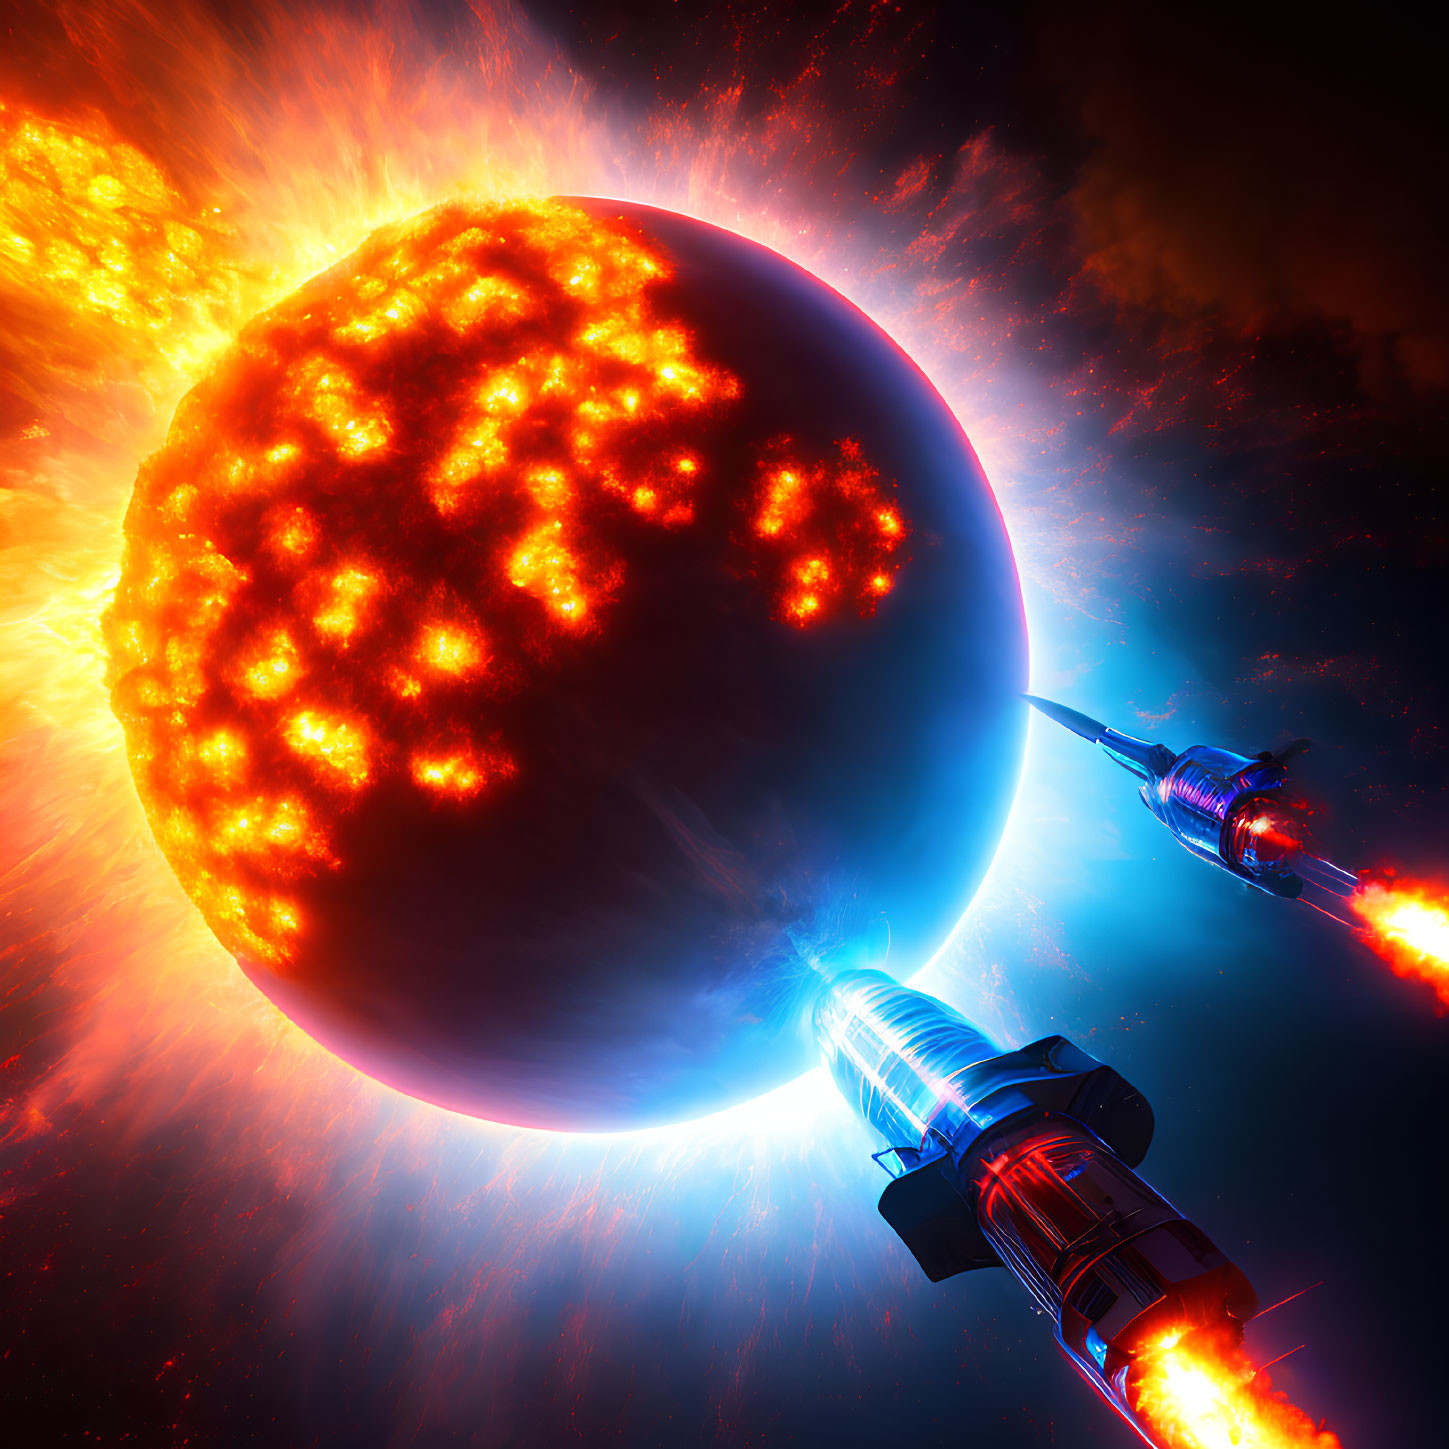 Sci-fi scene: Spaceships extracting resources from flaming asteroid near burning sun